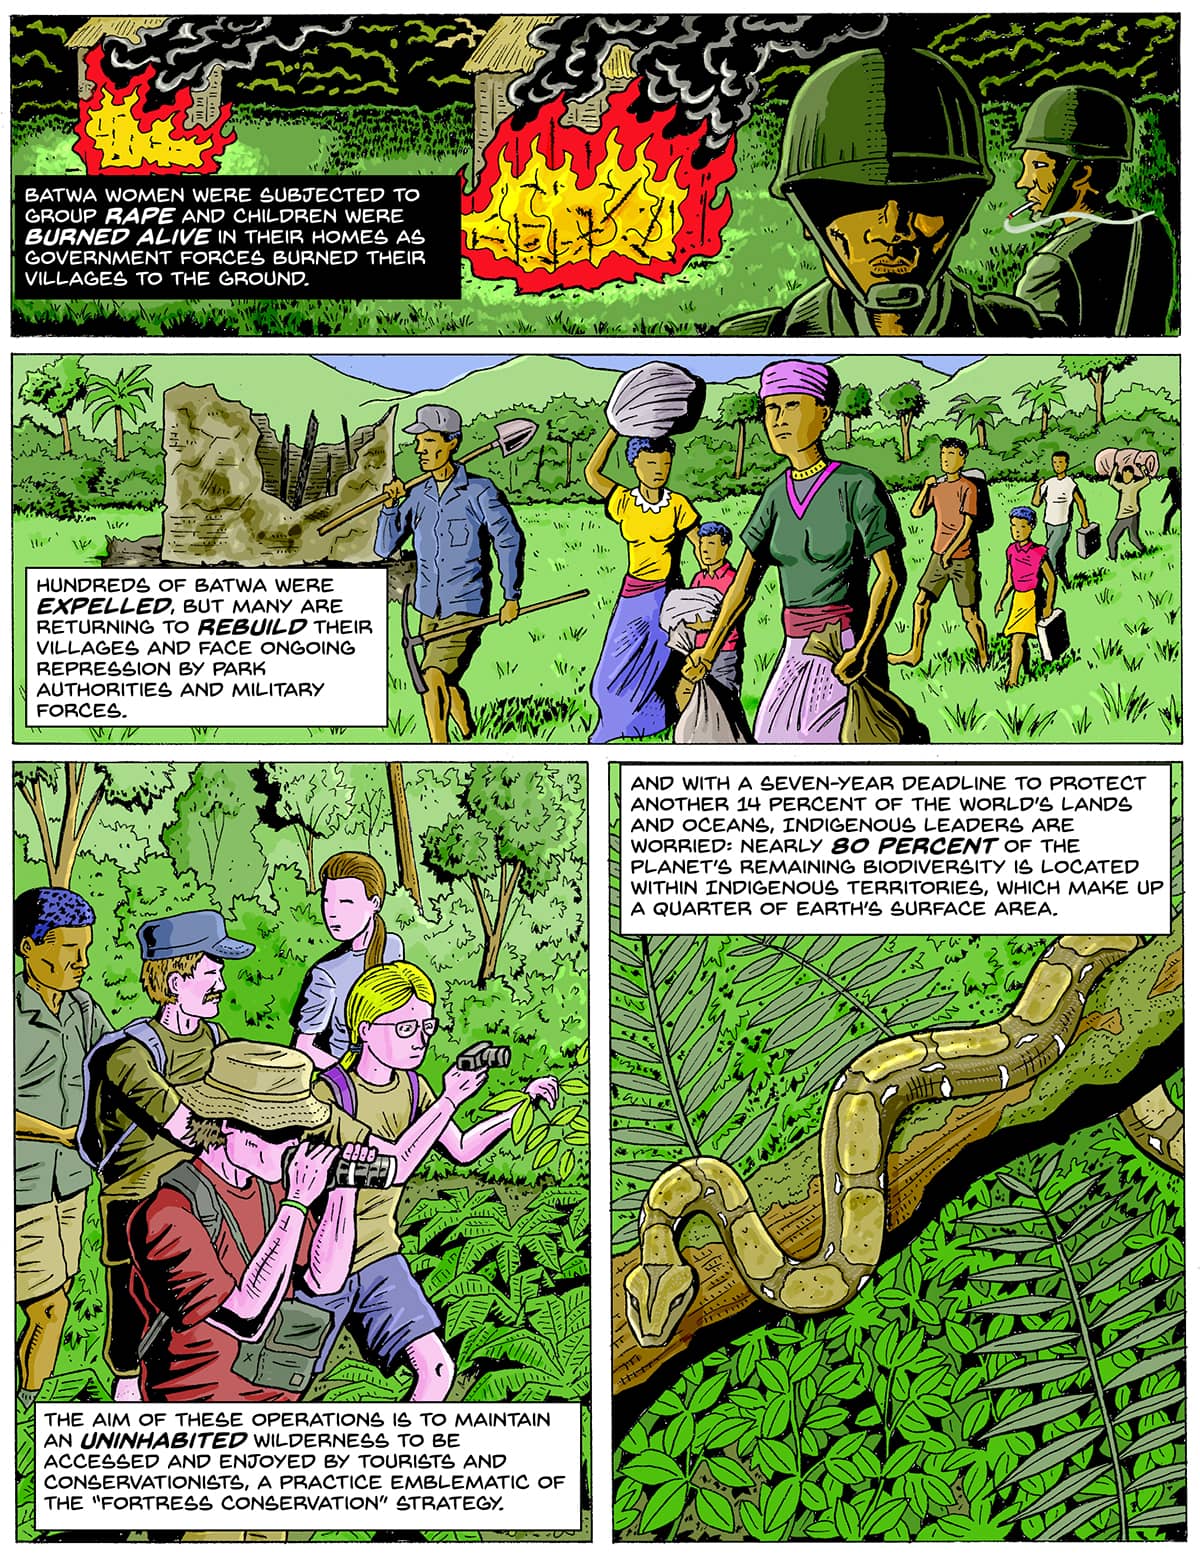 A four-panel comic. Top: Men in military green helmets walk amongst flaming structures. Middle: Men, women, and children in civilian dress walk through a field carrying baskets and sacks. Bottom left: People in t-shirts and bucket hats walk through the jungle. Bottom right: a green striped snake crawls along a branch. Text: Batwa women were subjected to group rape and children were burned alive in their homes as government forces burned their villages to the ground. Hundreds of Batwa were expelled, but many are returning to rebuild their villages and face ongoing repression by park authorities and military forces. The aim of these operations is to maintain an uninhabited wilderness to be accessed and enjoyed by tourists and conservationists, a practice emblematic of the “fortress conservation” strategy. And with a seven-year deadline to protect another 14 percent of the world’s lands and oceans, Indigenous leaders are worried: Nearly 80 percent of the planet’s remaining biodiversity is located within Indigenous territories, which make up a quarter of Earth’s surface area.